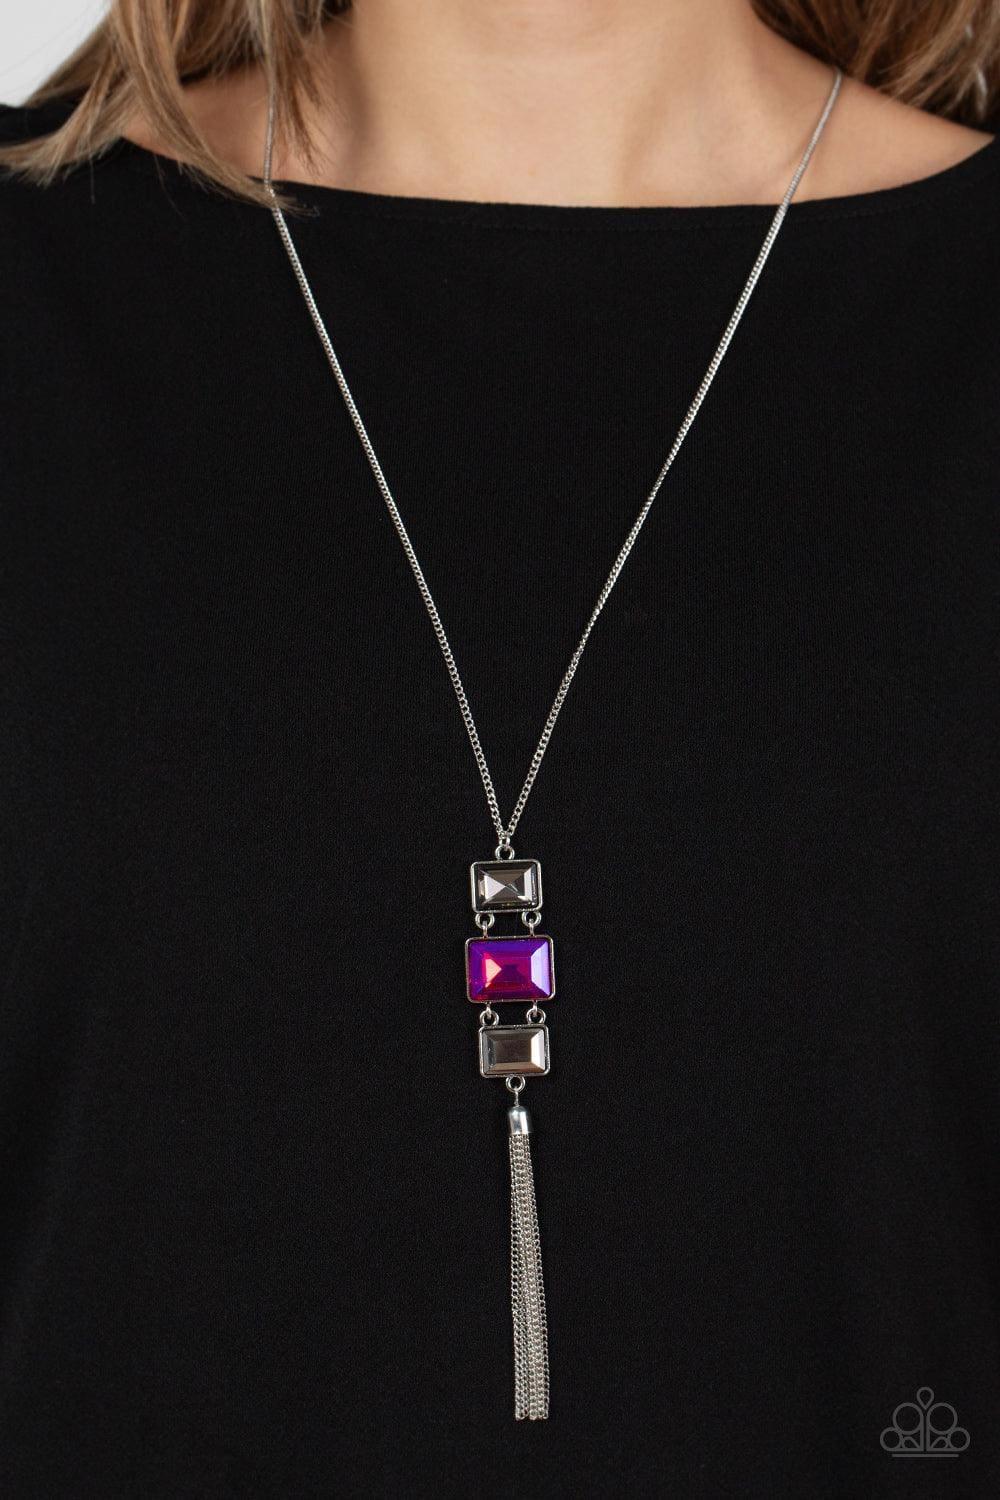 Paparazzi Accessories - Uptown Totem - Pink Necklace - Bling by JessieK